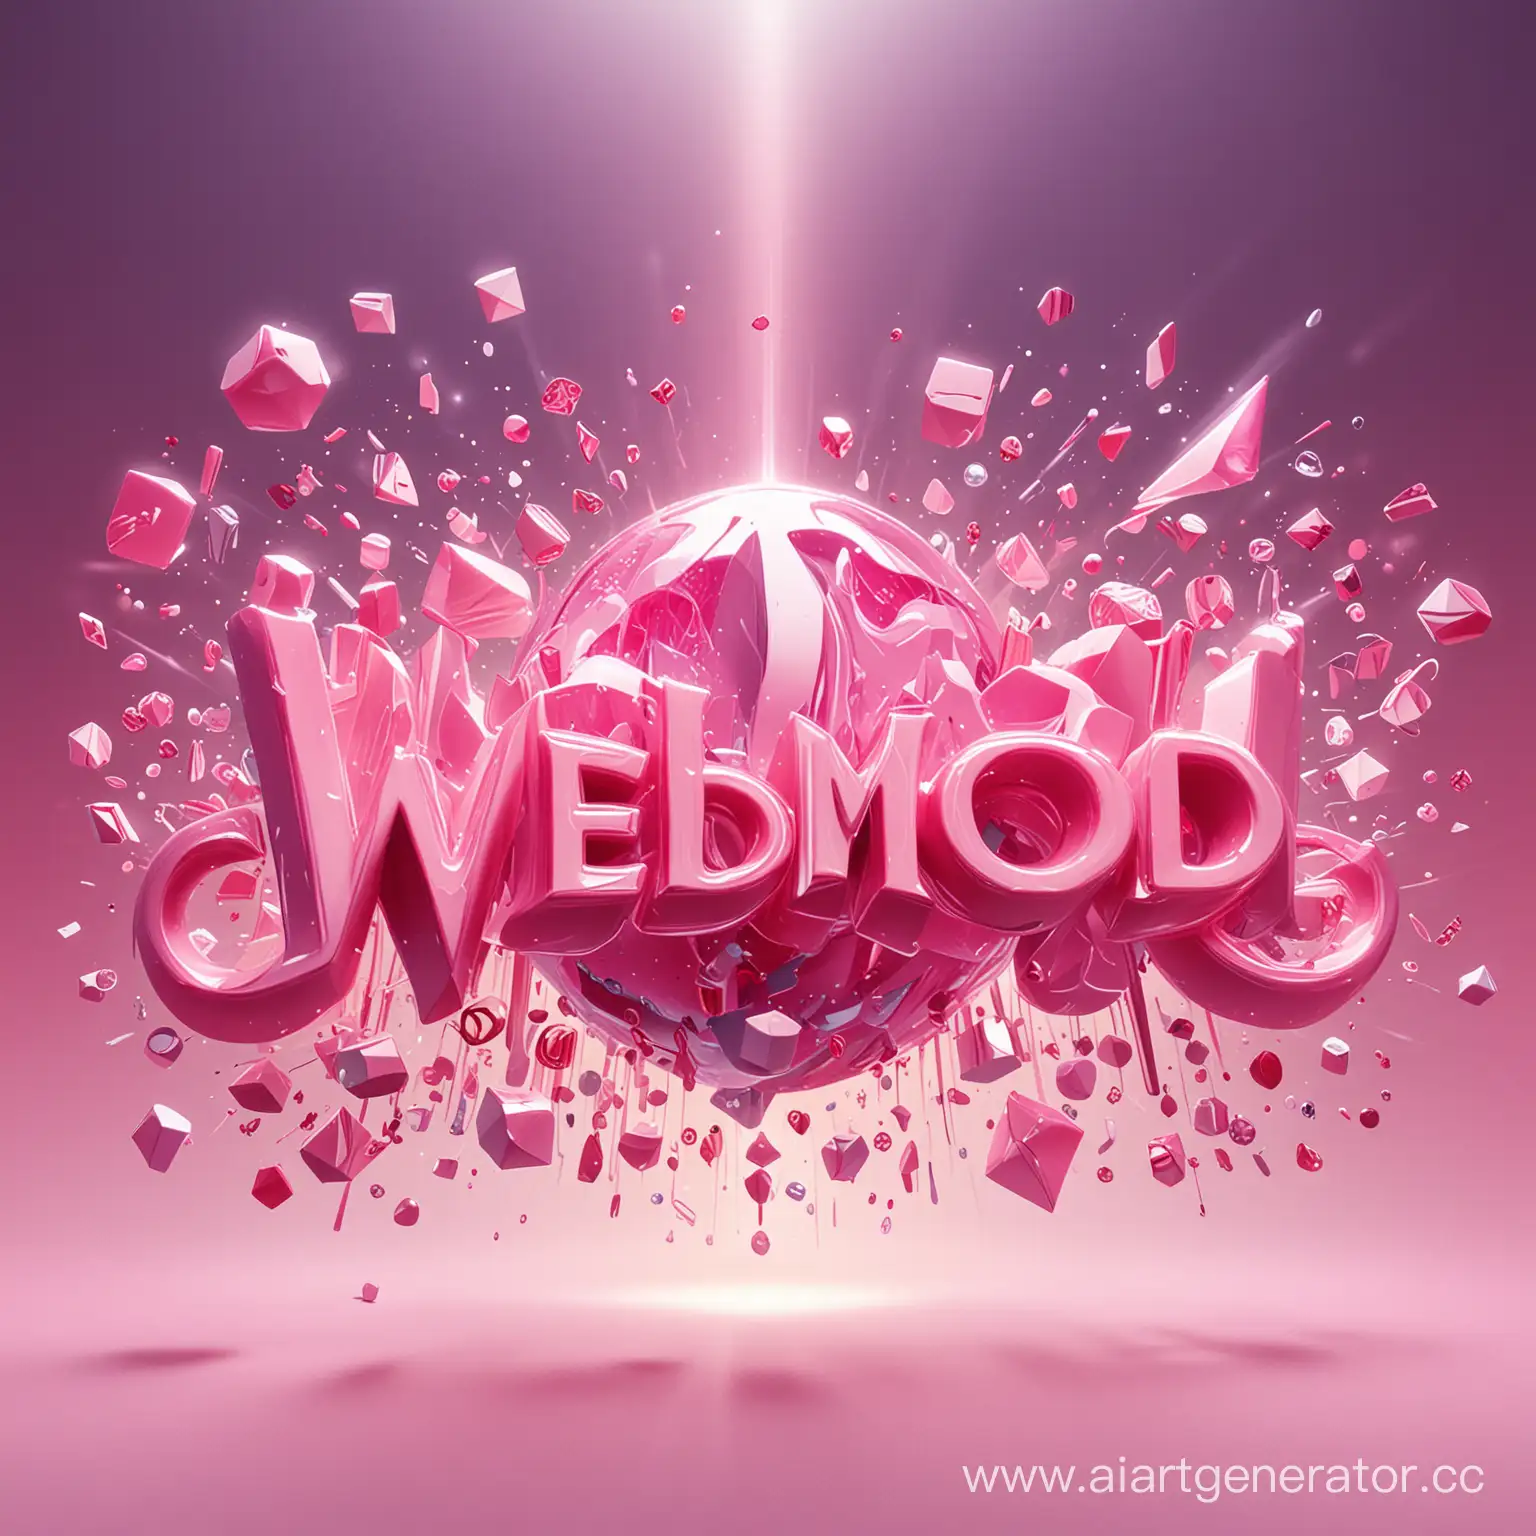 Abstract-Streaming-Webmood-Logo-with-Pink-Lettering-and-Fashionable-Accessories